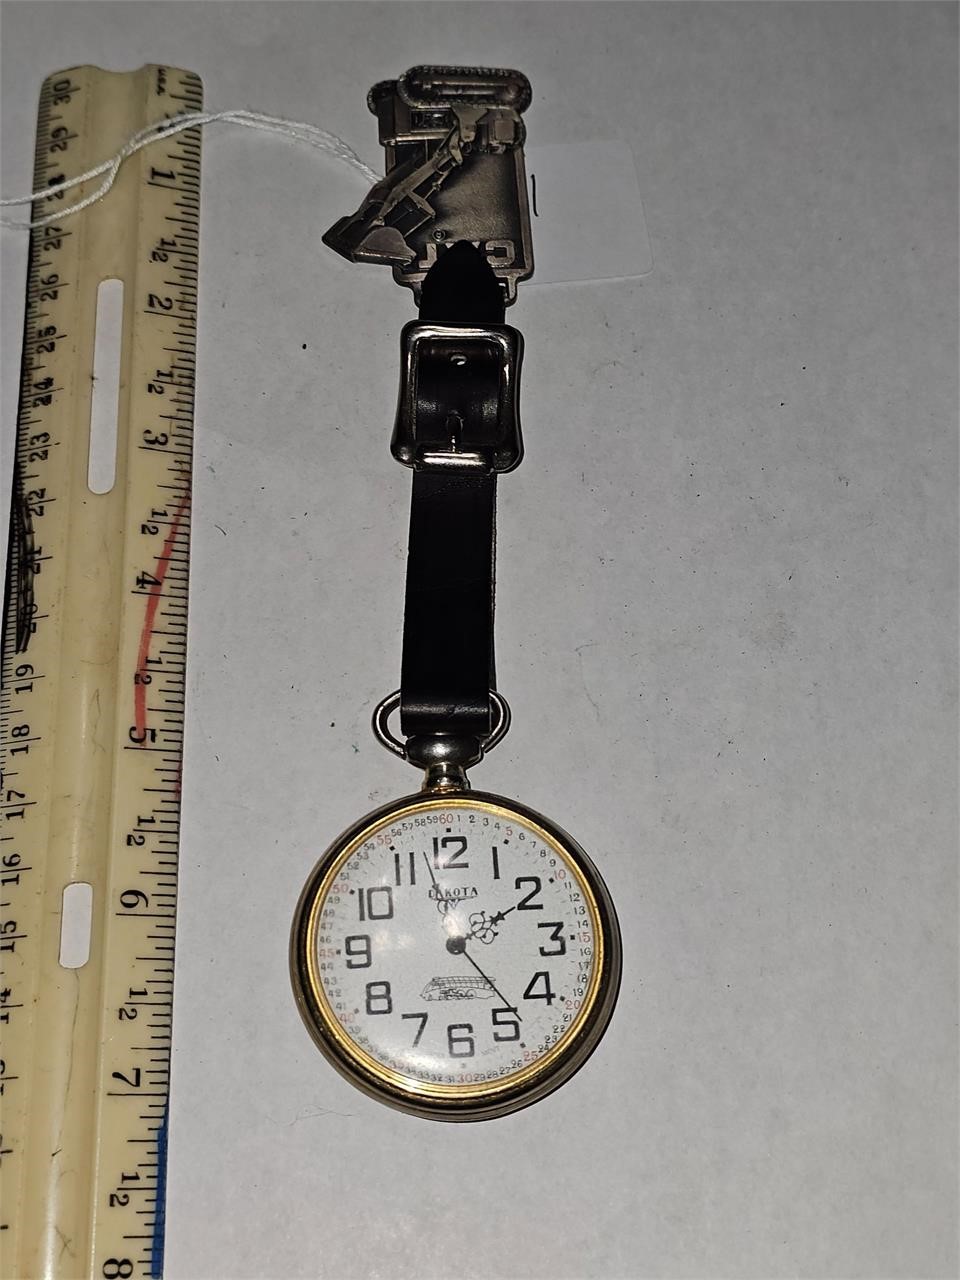 Pocket watch with CAT fob, watch has damage